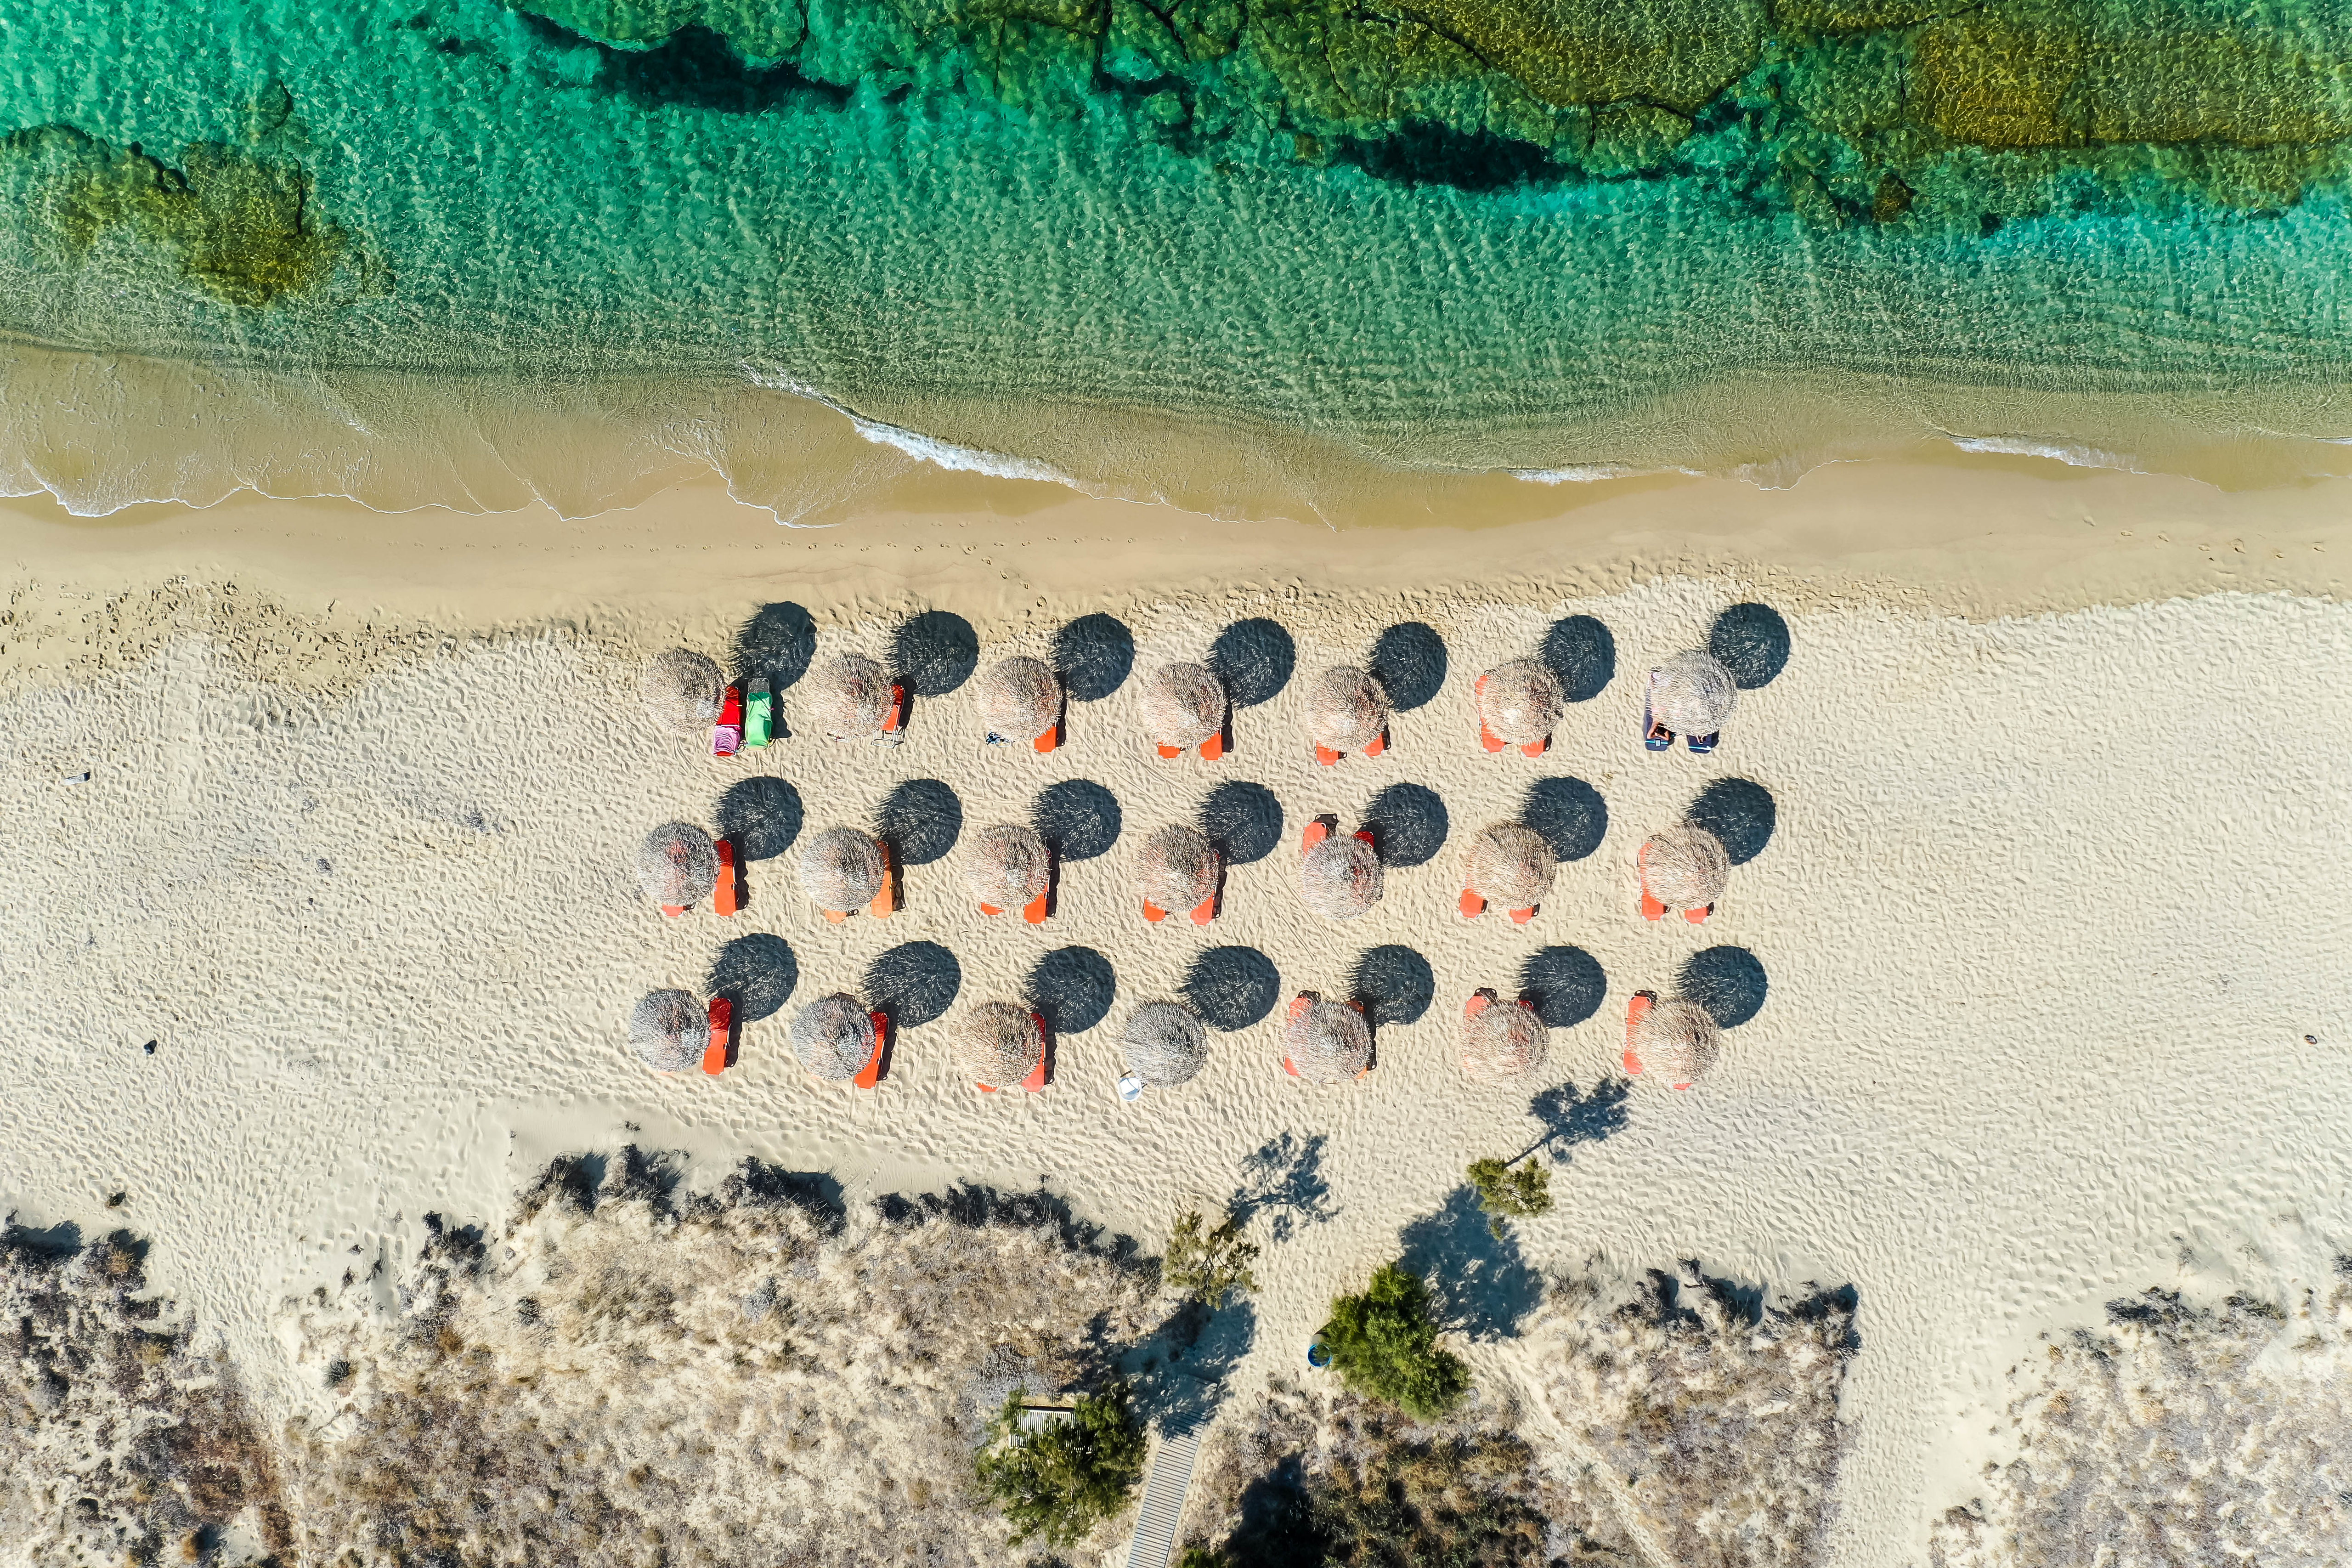 android nature, sea, beach, view from above, umbrellas